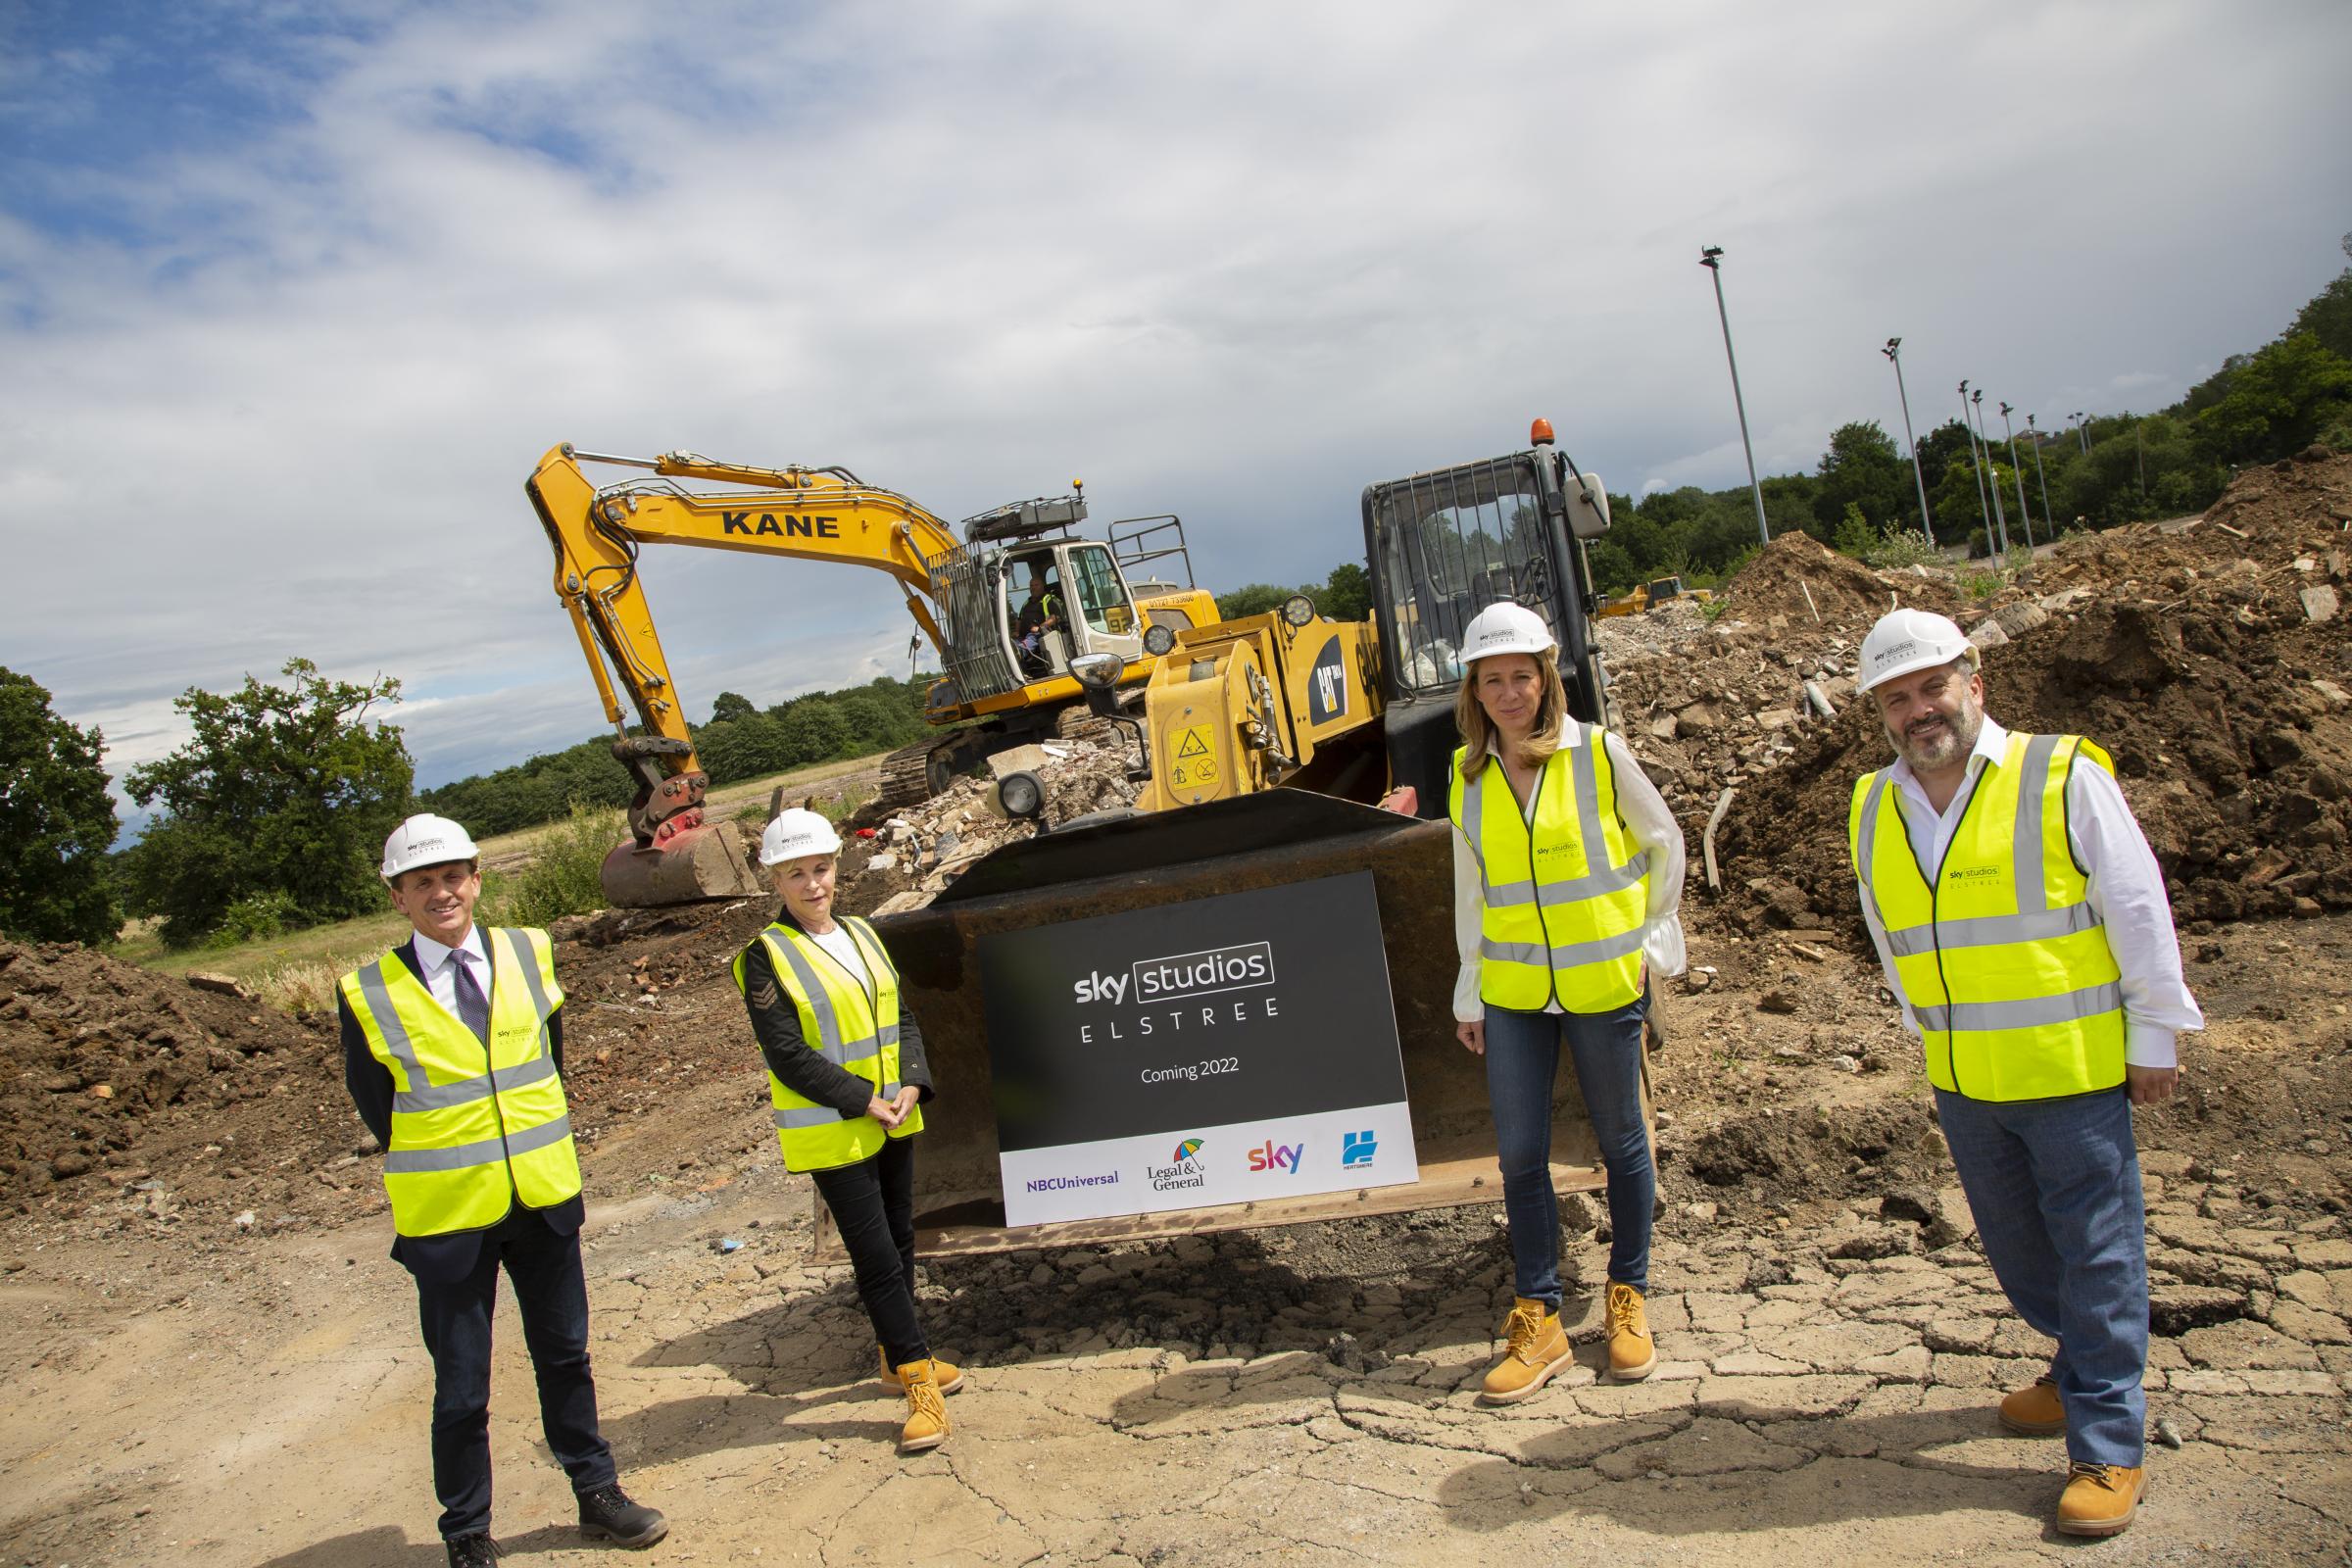 L-R: Nigel Wilson (CEO, Legal & General), Helen Parker (EVP of Universal Pictures Content Group, NBCUniversal), Caroline Cooper (CFO, Sky Studios) and Cllr. Morris Bright MBE (Leader of Hertsmere Borough Council) on the building site of Sky Studios Elstre